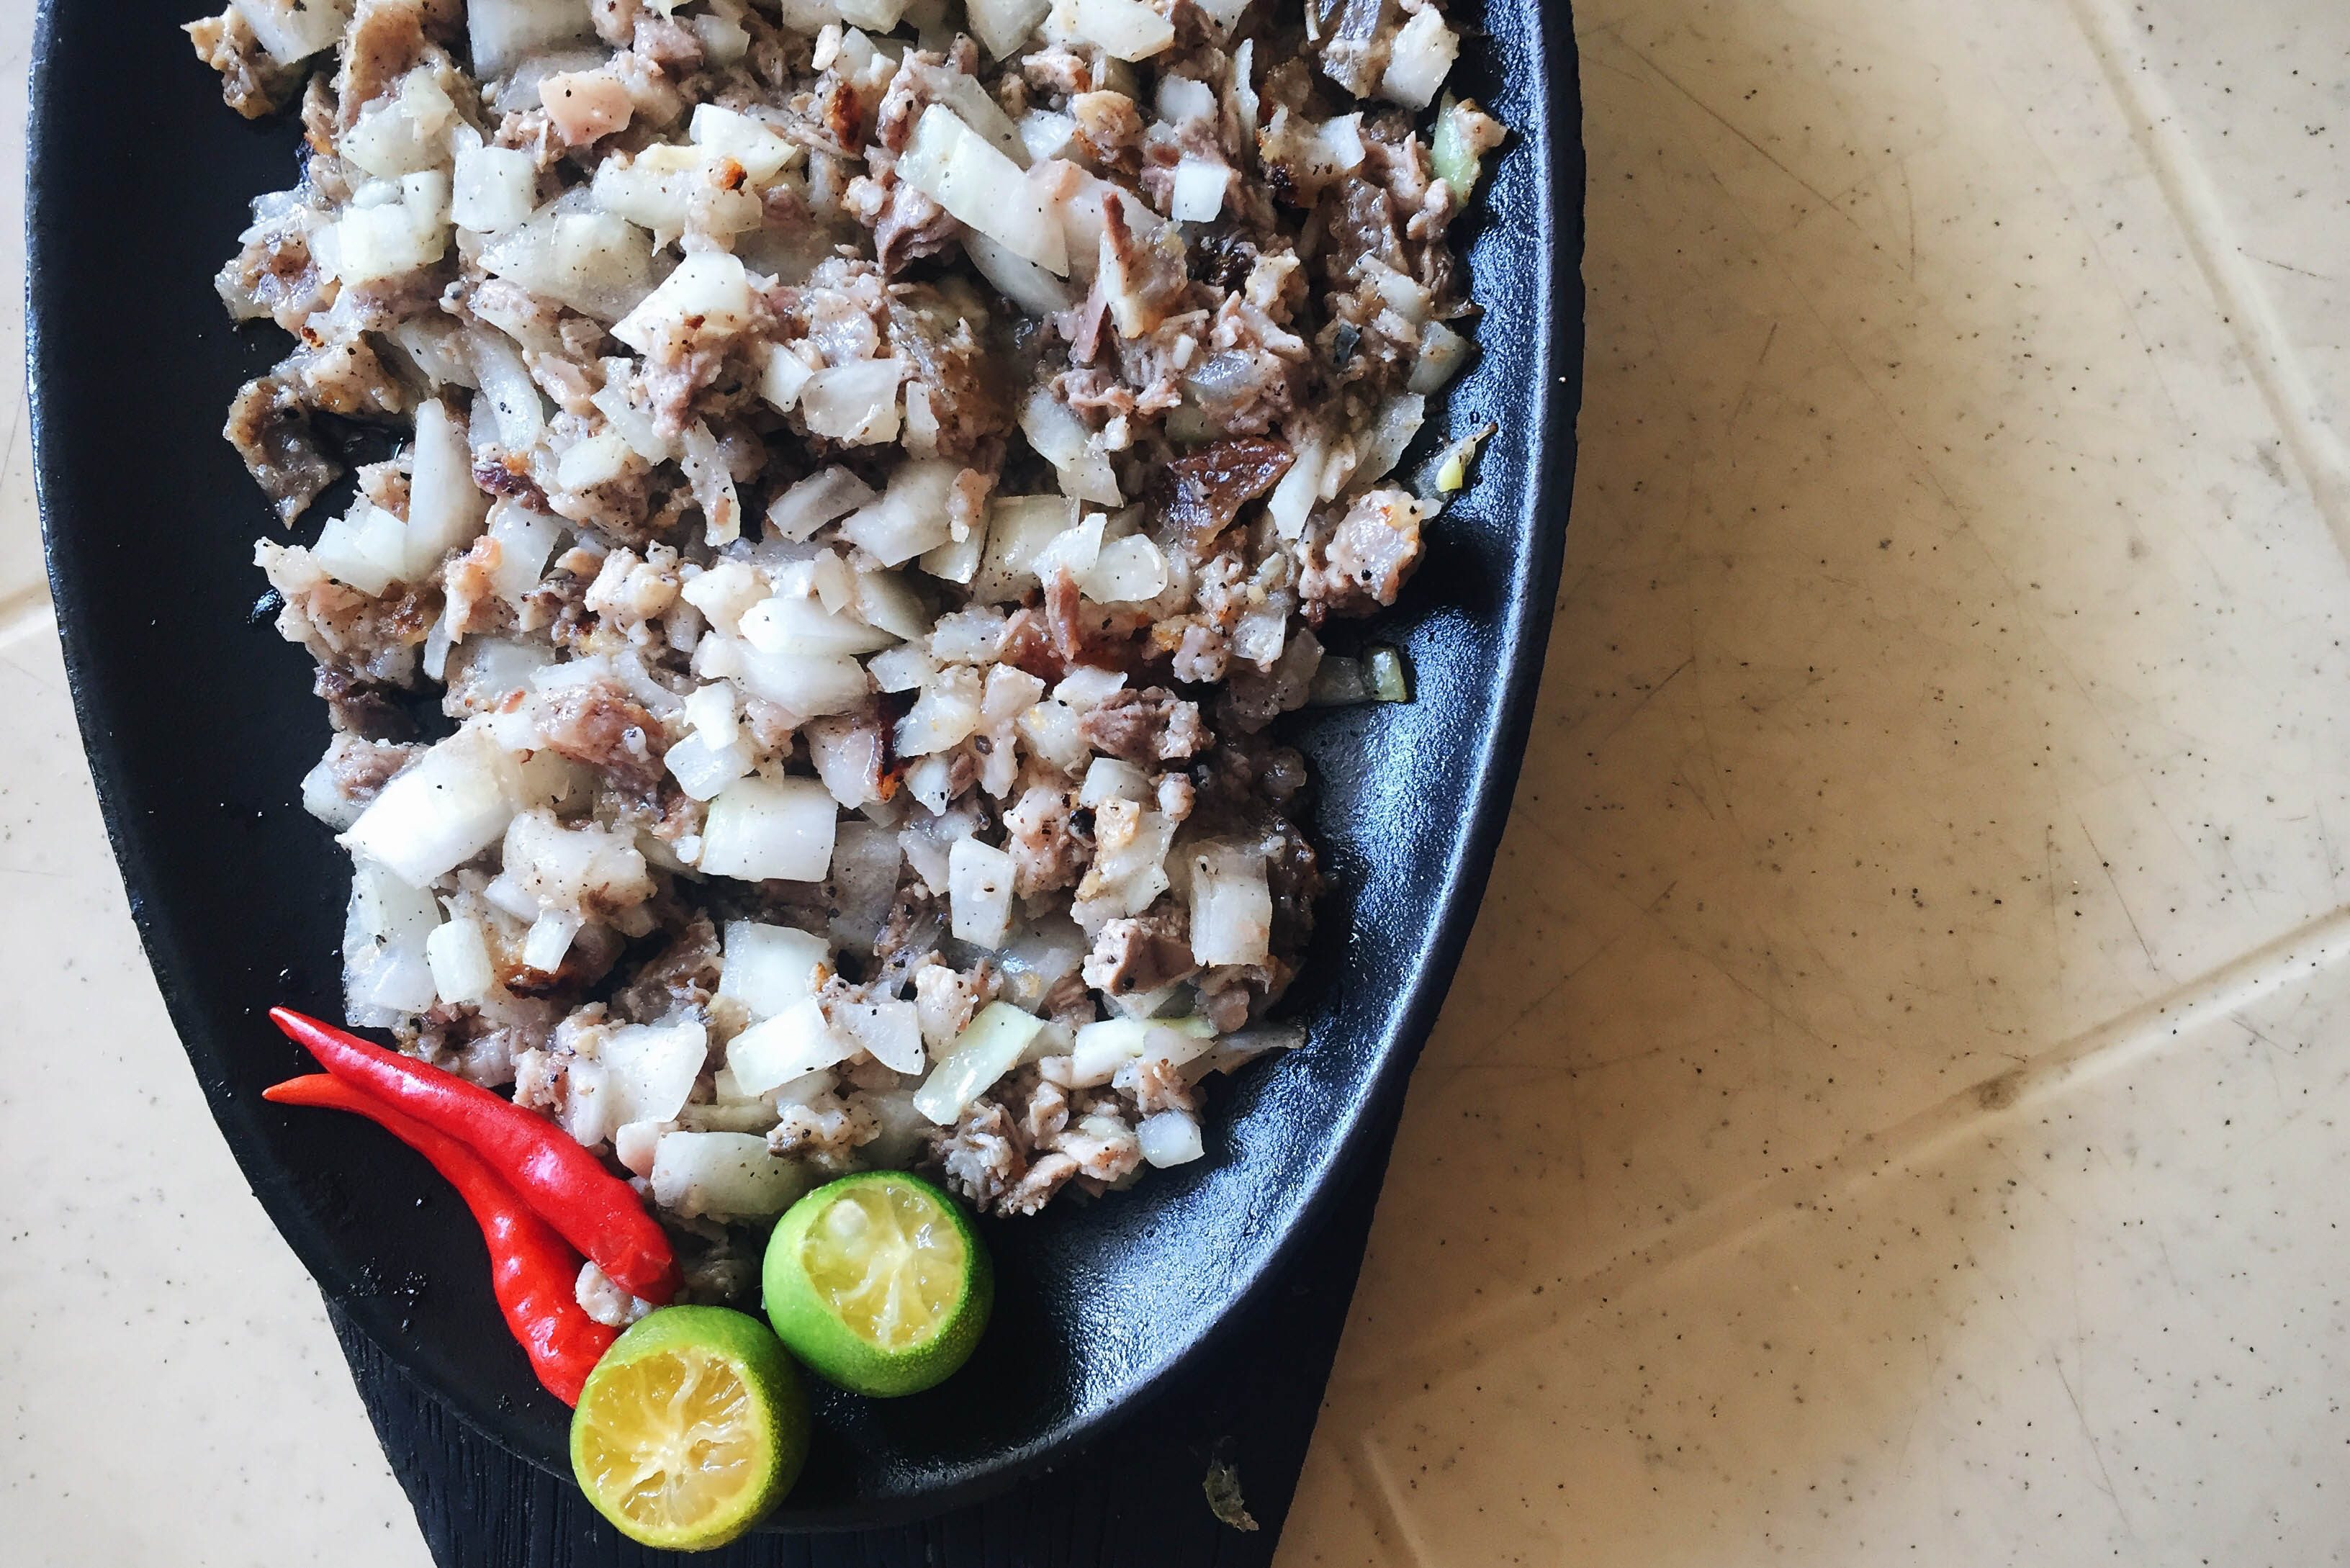 ALING LUCING'S SISIG. Rumor has it that Aling Lucing's sisig was so good was murdered for secret sisig recipe. Photo by Vernise L. Tantuco  